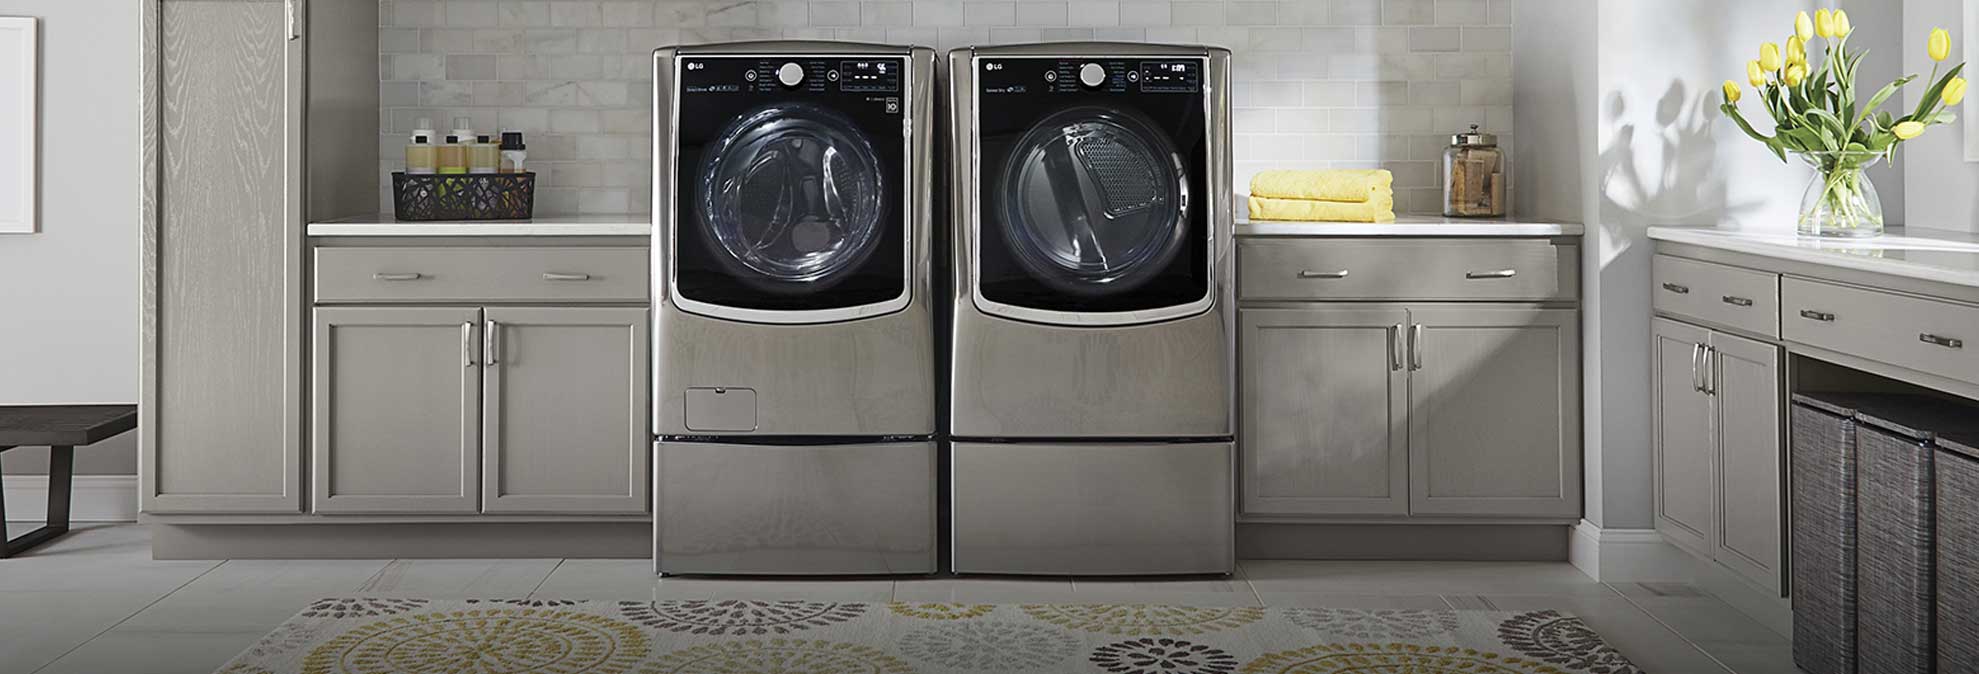 Matching Washers and Dryers Reliability Consumer Reports